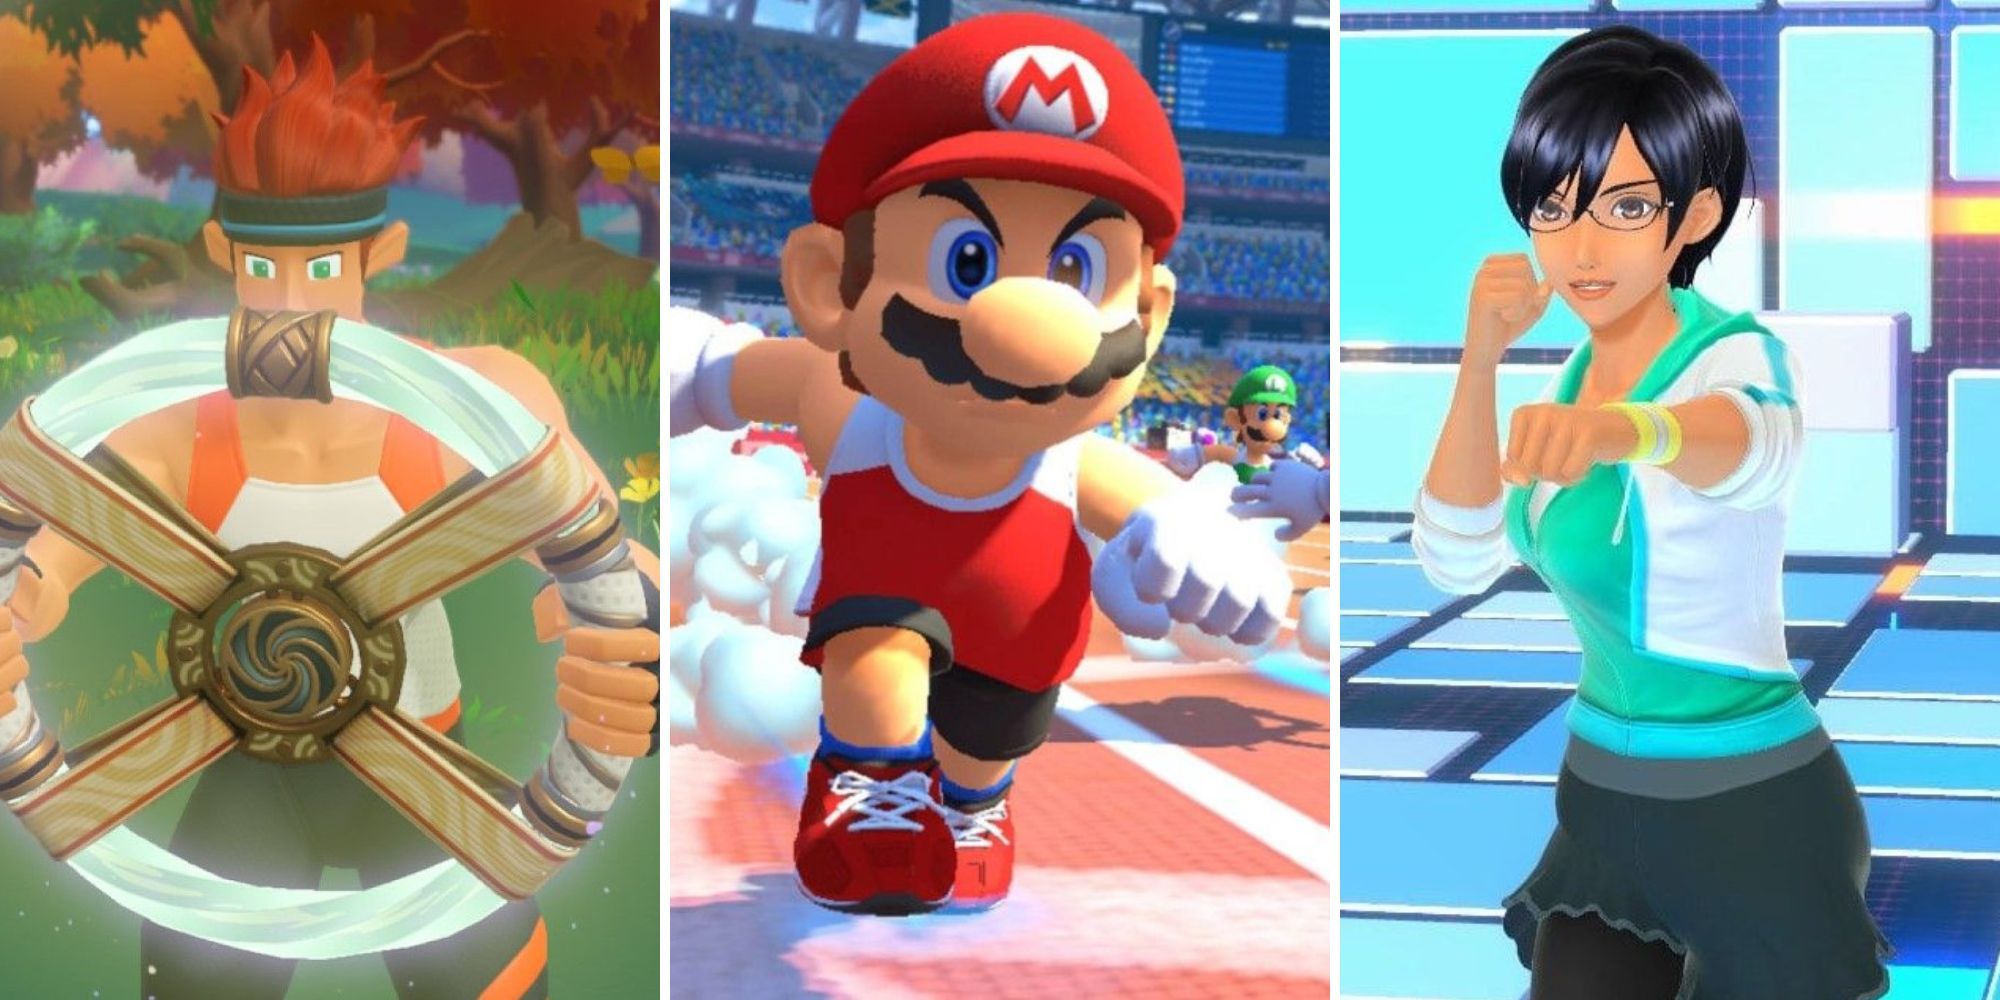 A grid showing the sports games Ring Fit Adventure, Mario & Sonic at the Olympic Games Tokyo 2020, and Fitness Boxing 2: Rhythm & Exercise